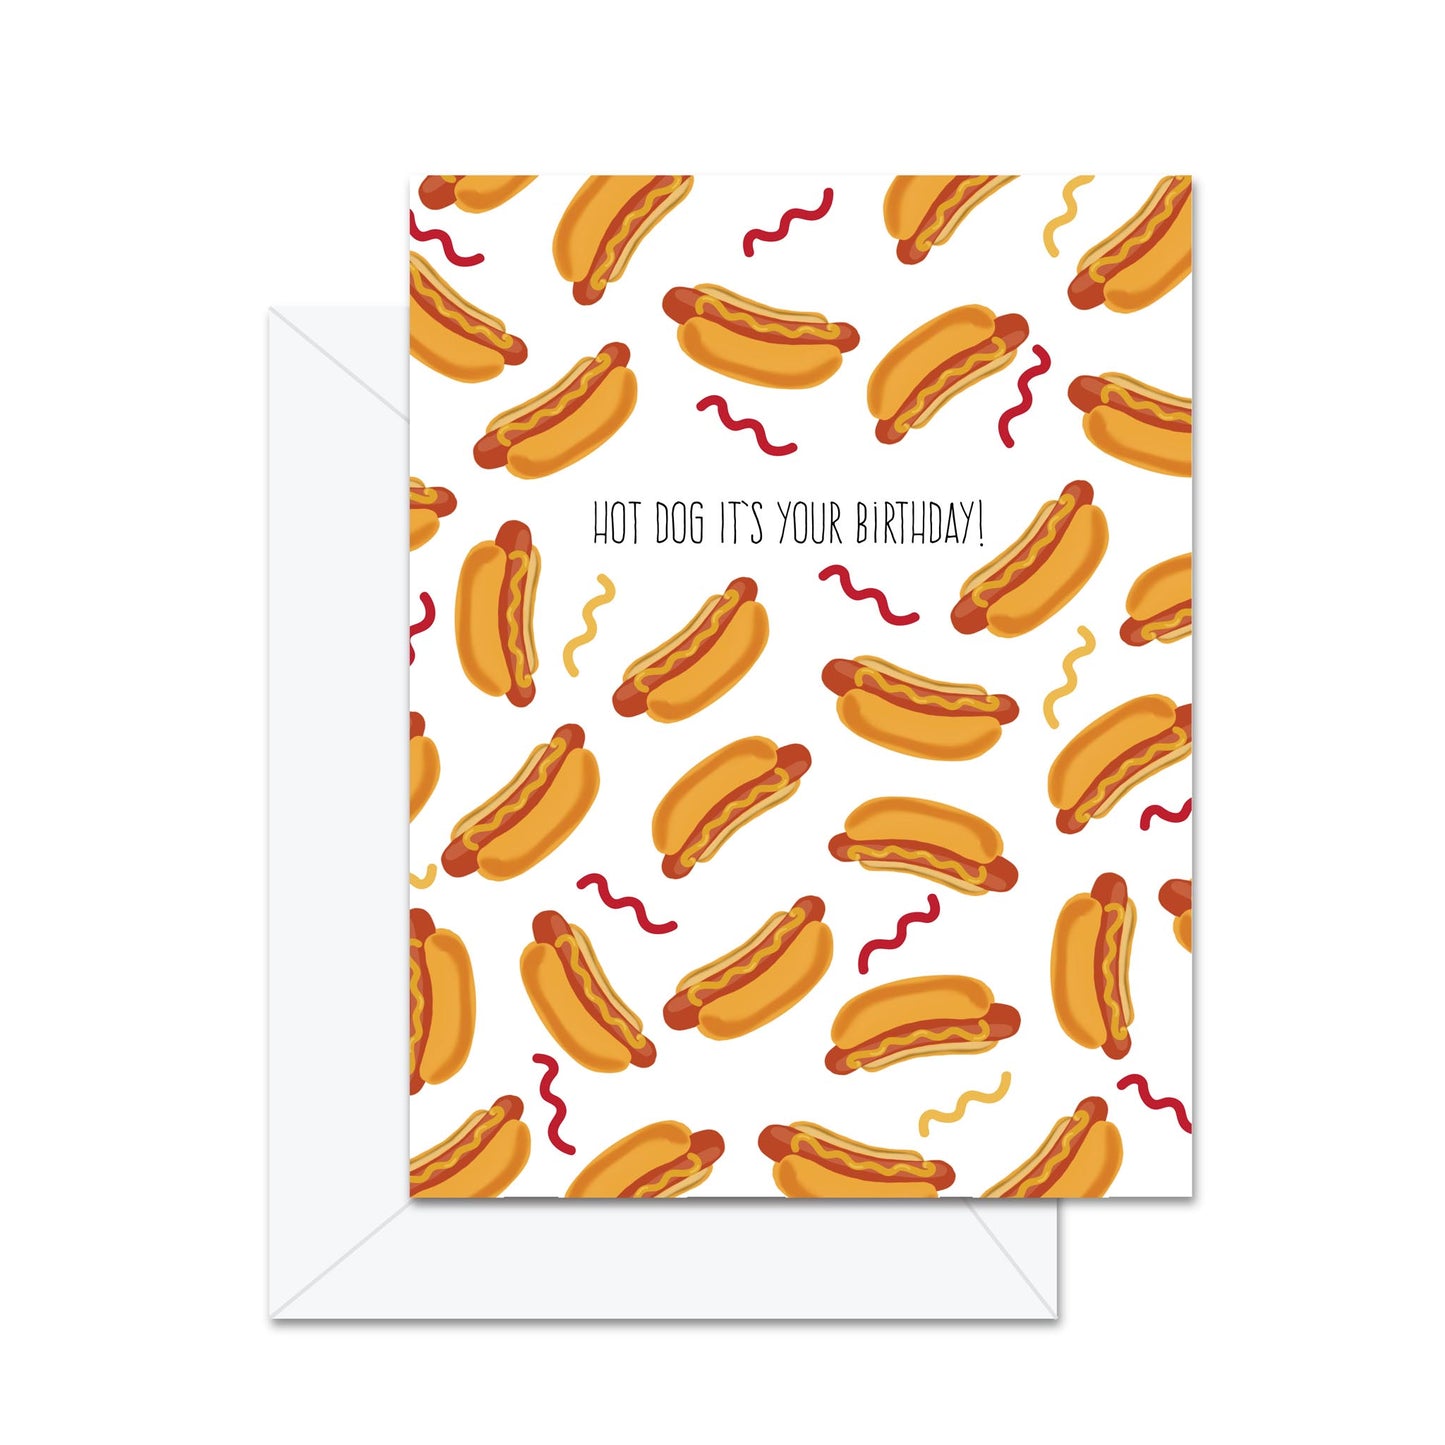 Hot Dog It's Your Birthday! - Greeting Card